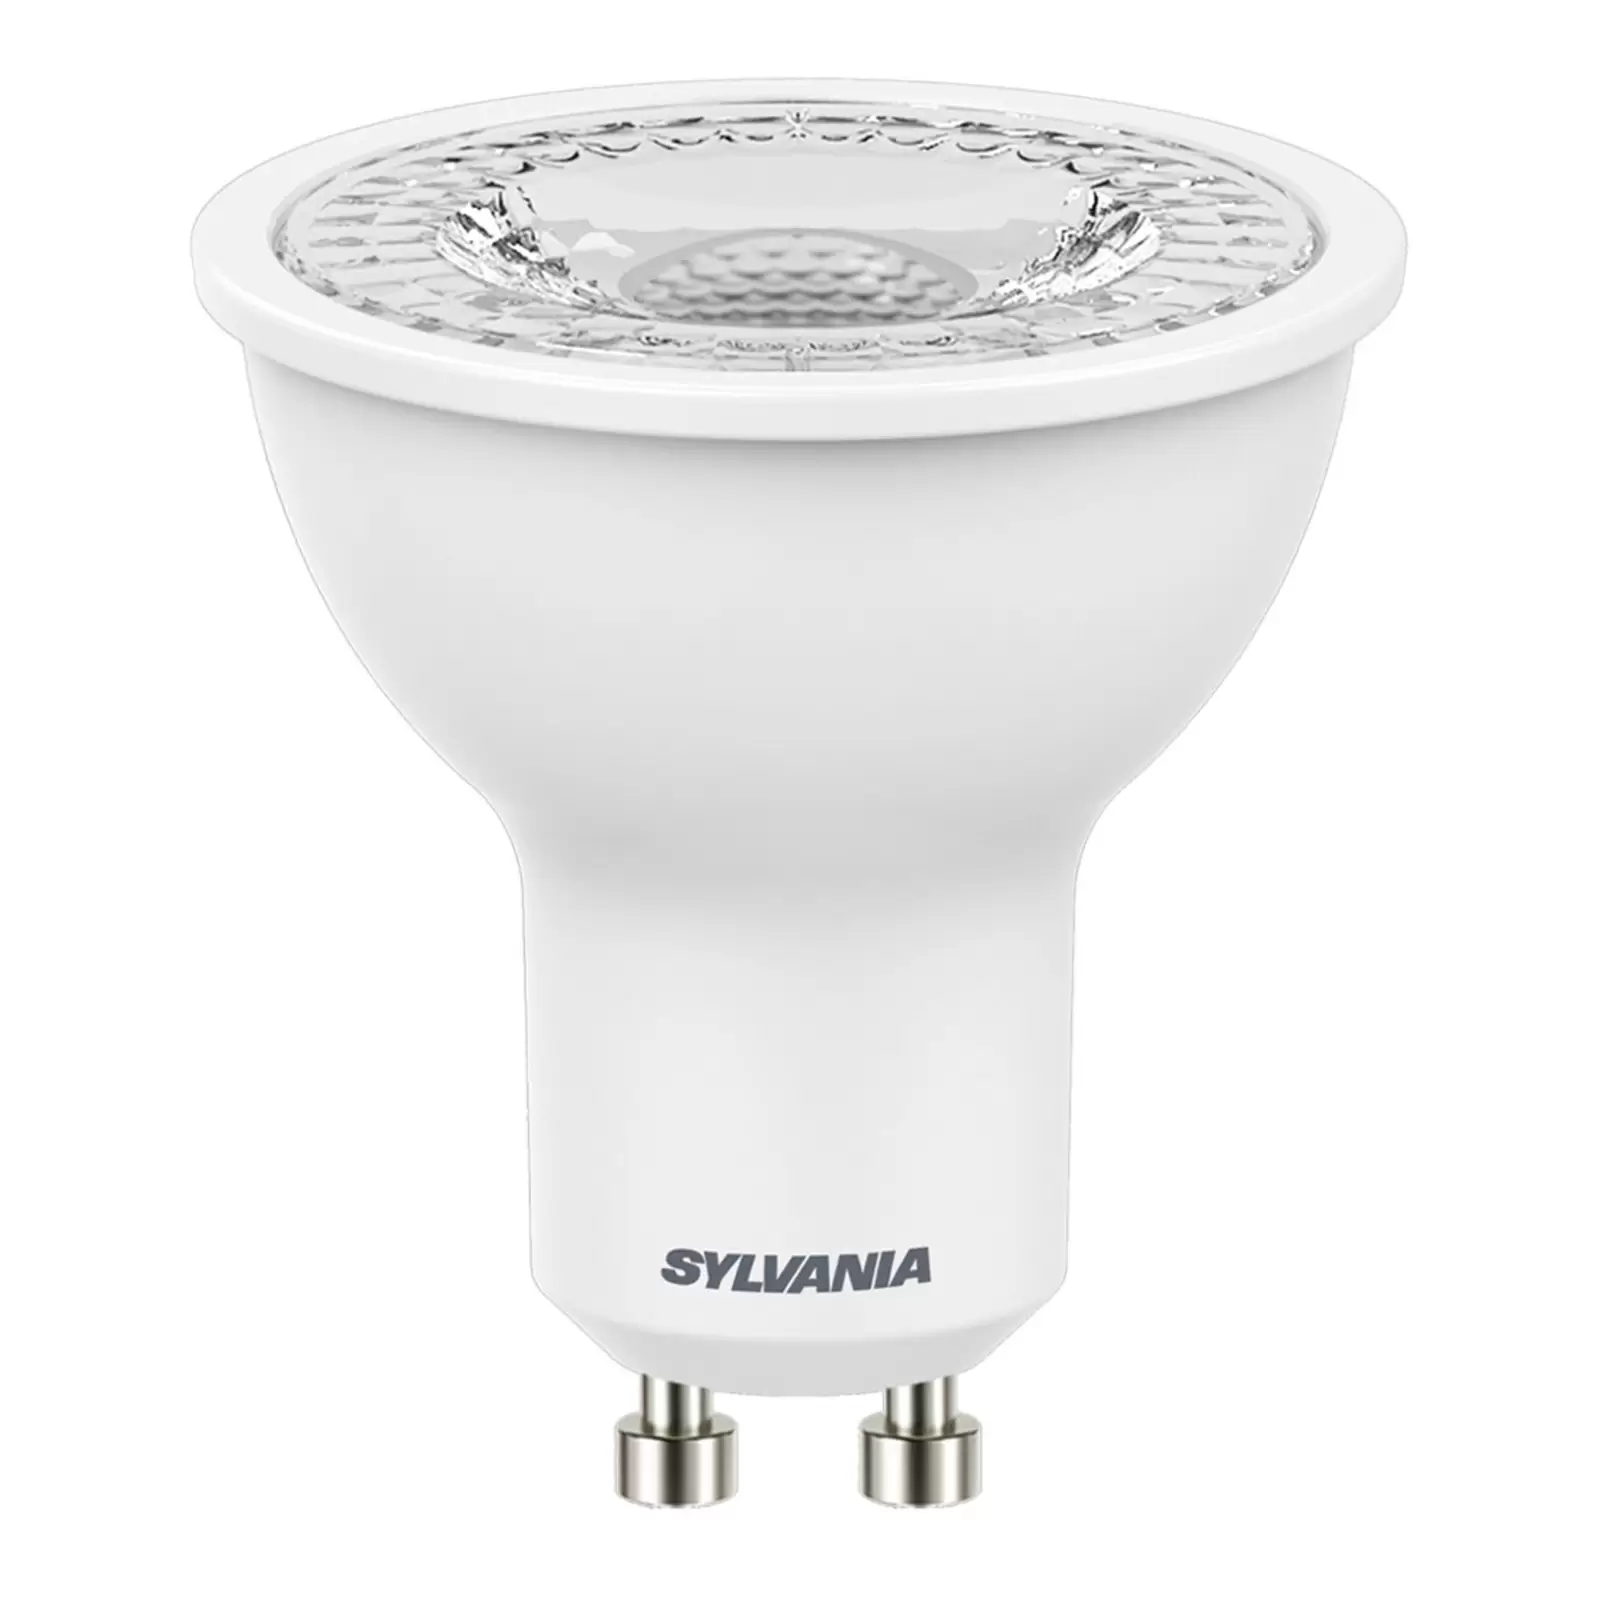 Philips LED GU10 3,5 W 255lm 827 claire 36° x2